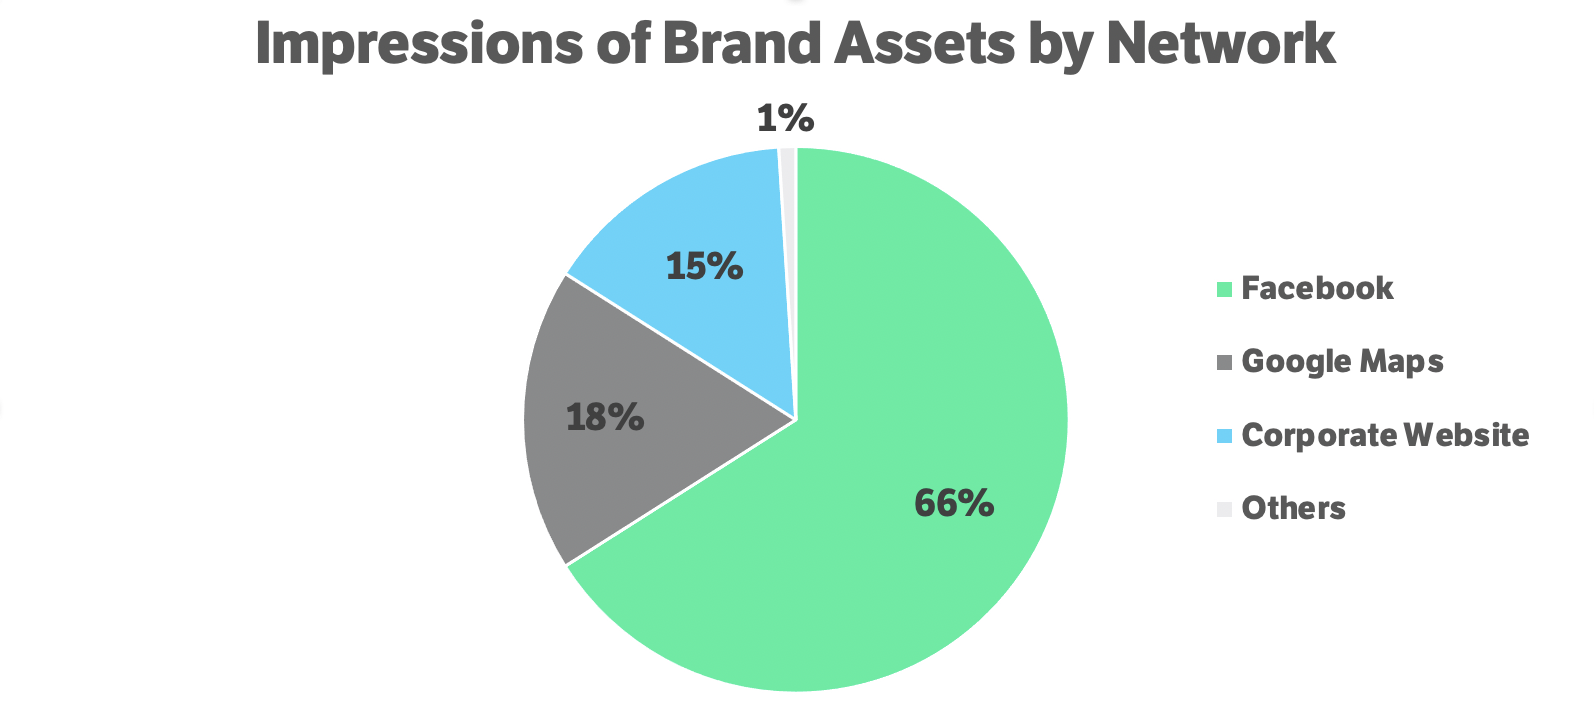 Impressions of Brand Assets by Network